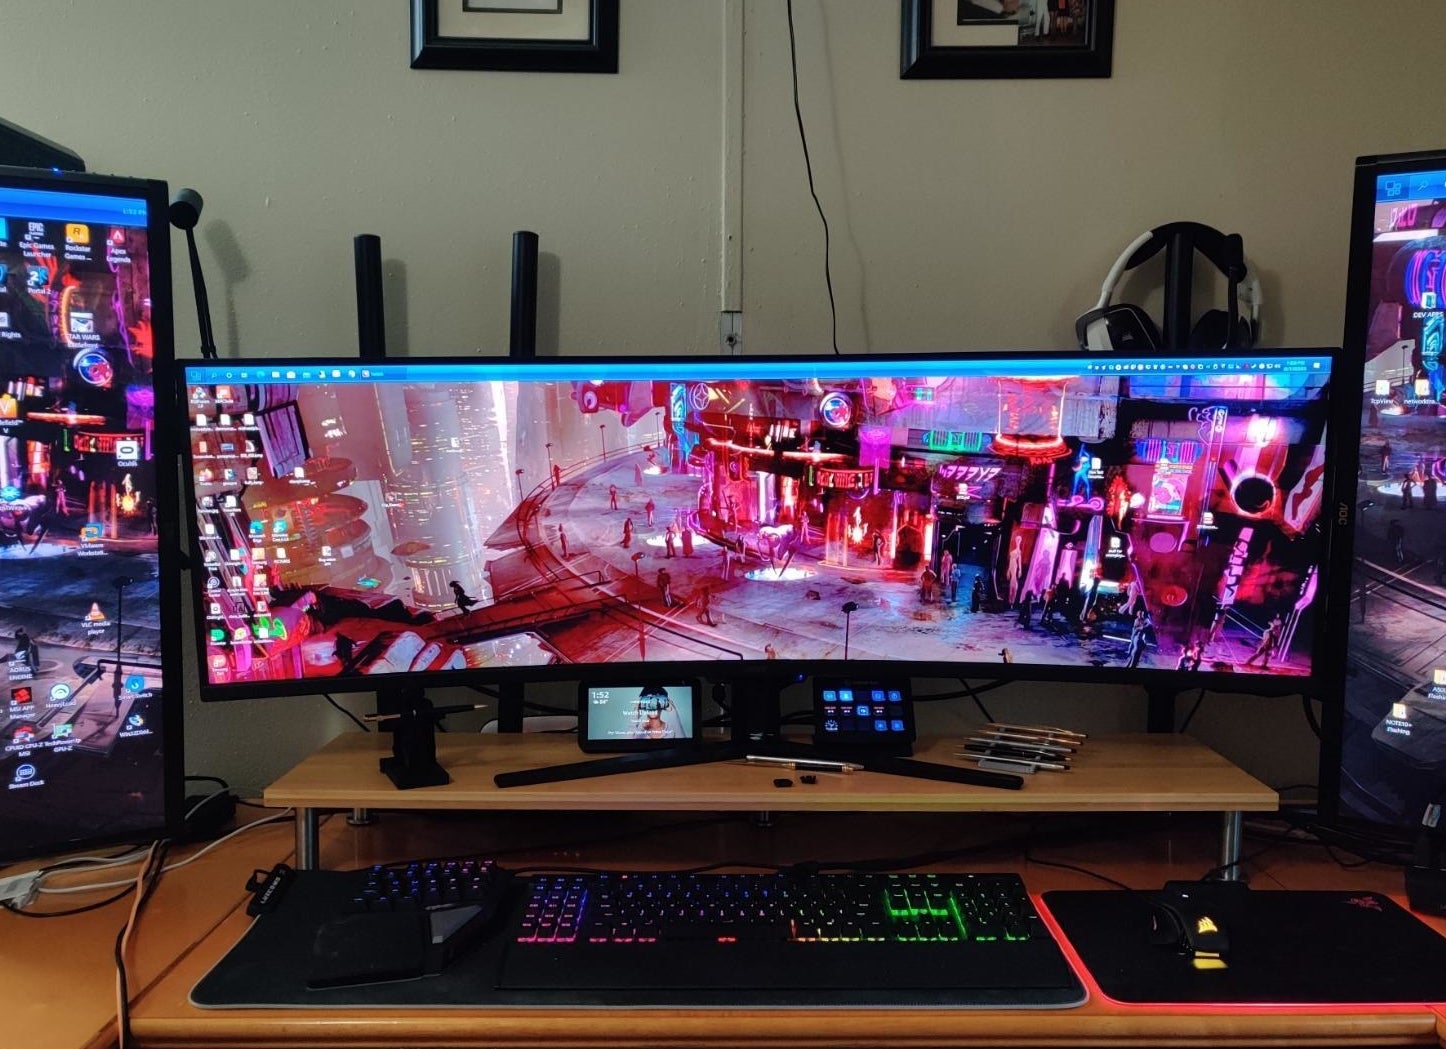 The best entry-level PC gaming setup - Coolblue - anything for a smile